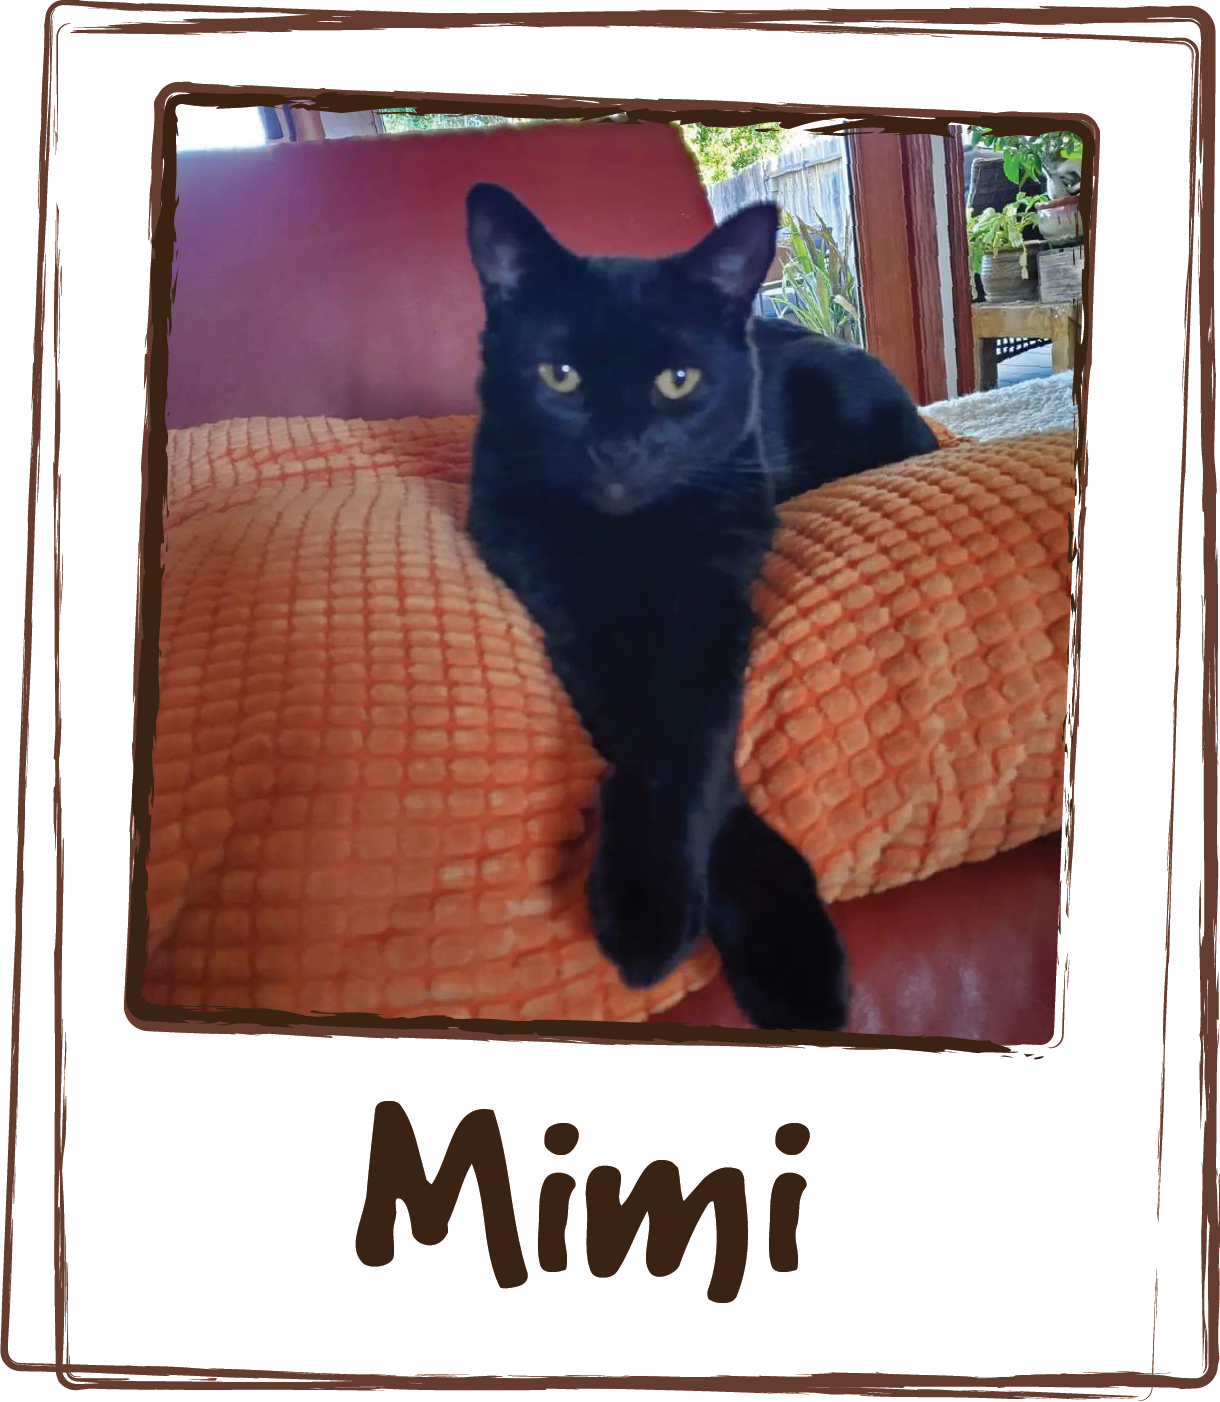  “Mimi has been over grooming for some time now.  I've tried everything to get her to stop, but nothing has worked.  Mimi is on her second box of Licks Cat Calming,  While she hasn't completely stopped licking all her fur off, I've noticed a differen